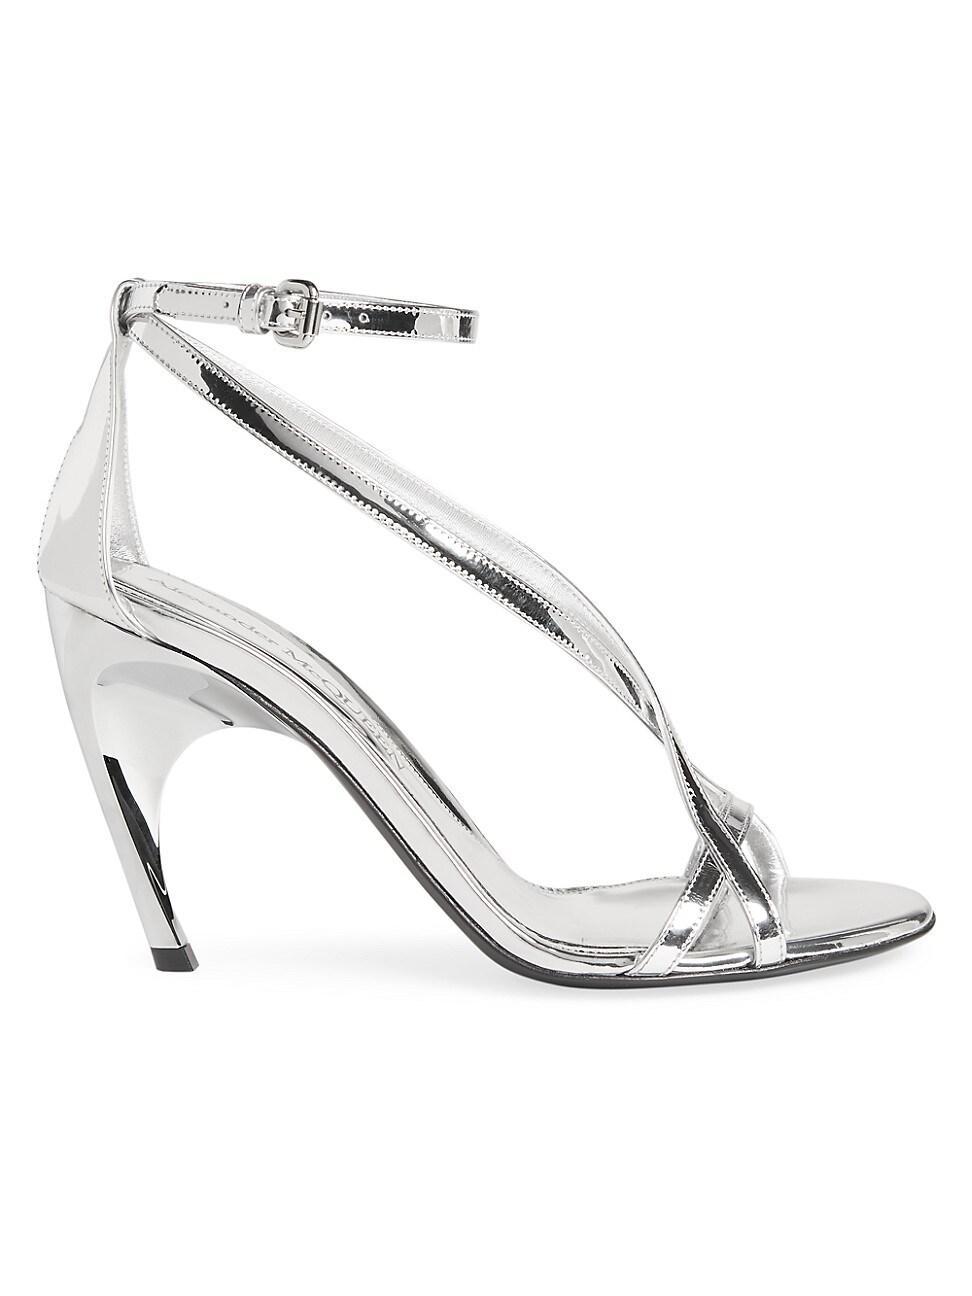 Alexander McQueen Twisted Ankle Strap Sandal Product Image